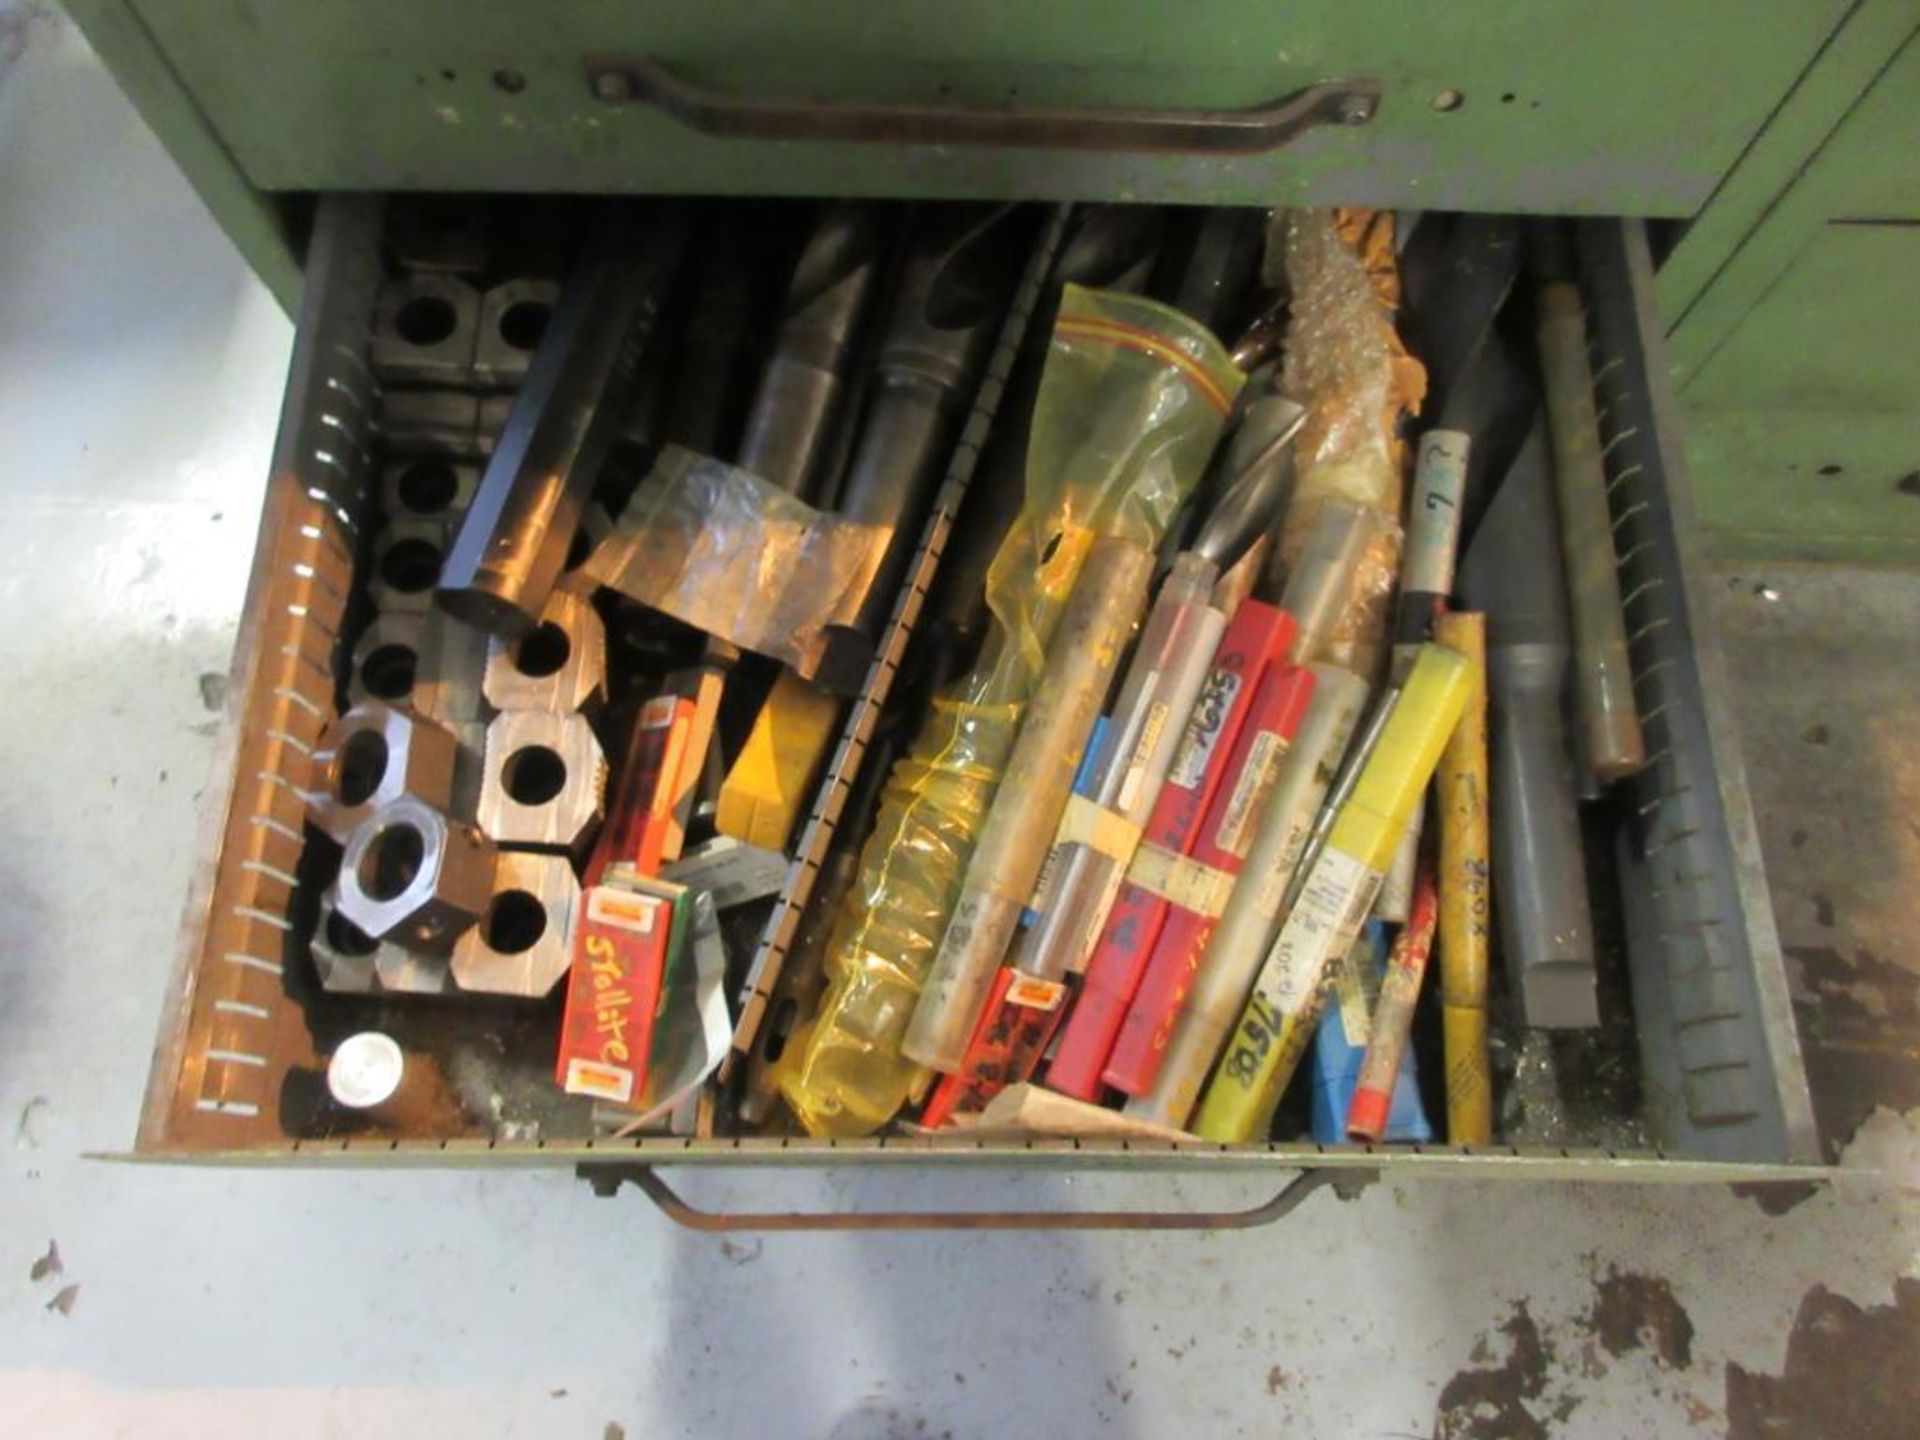 (2) VIDMAR CABINETS W/ TOOL BITS, CHUCK JAWS, DRILLS, OTHER TOOLING - Image 5 of 10